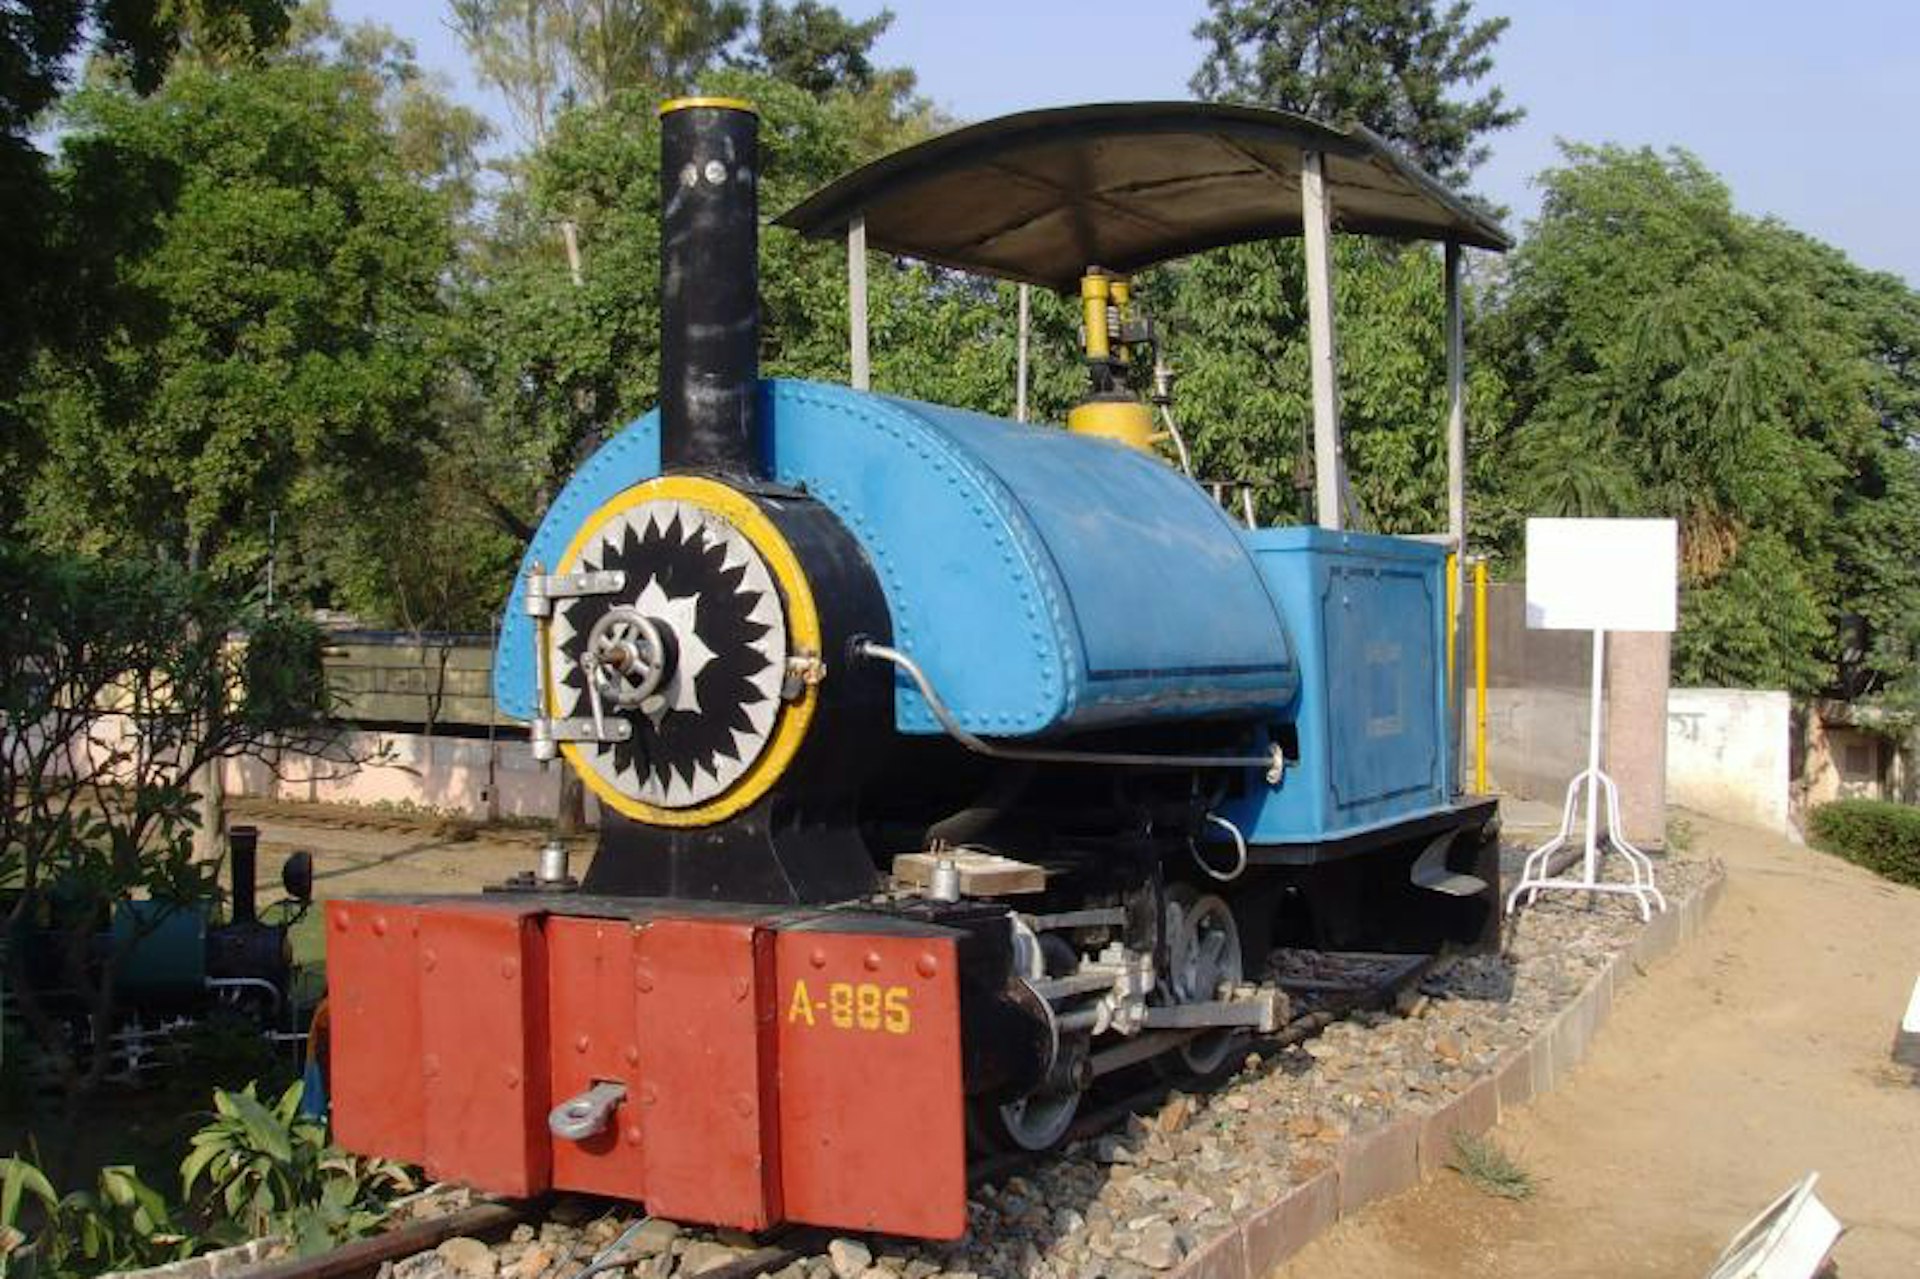 Old fashioned steam engine at Delhi's Railway Museum. Image by Klaus Nahr / CC BY 2.0